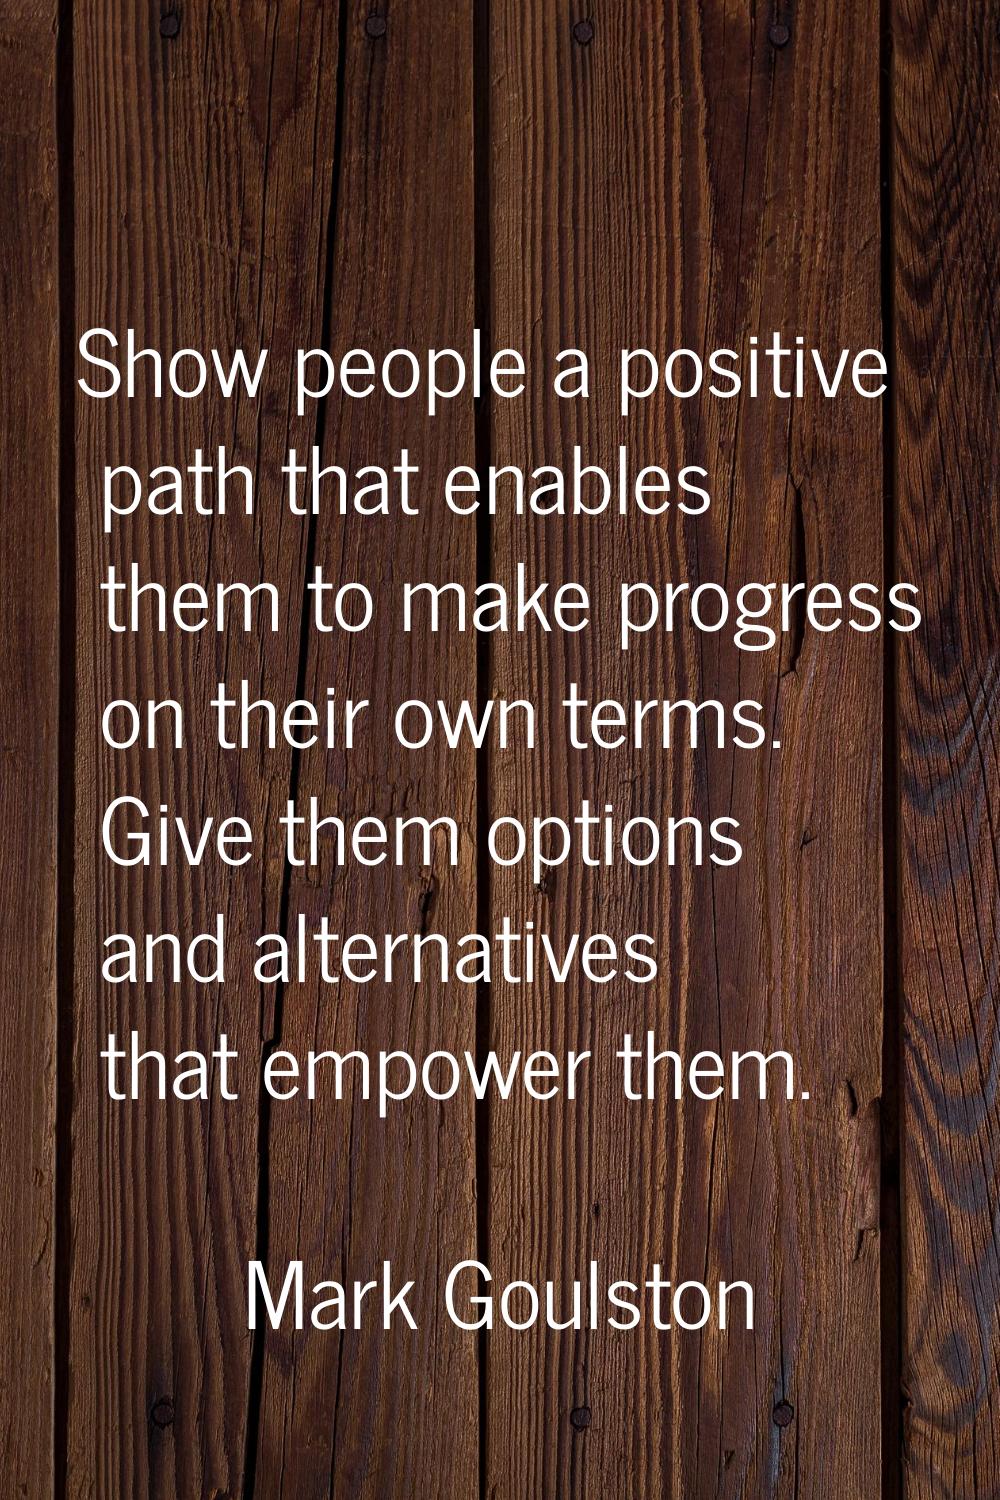 Show people a positive path that enables them to make progress on their own terms. Give them option